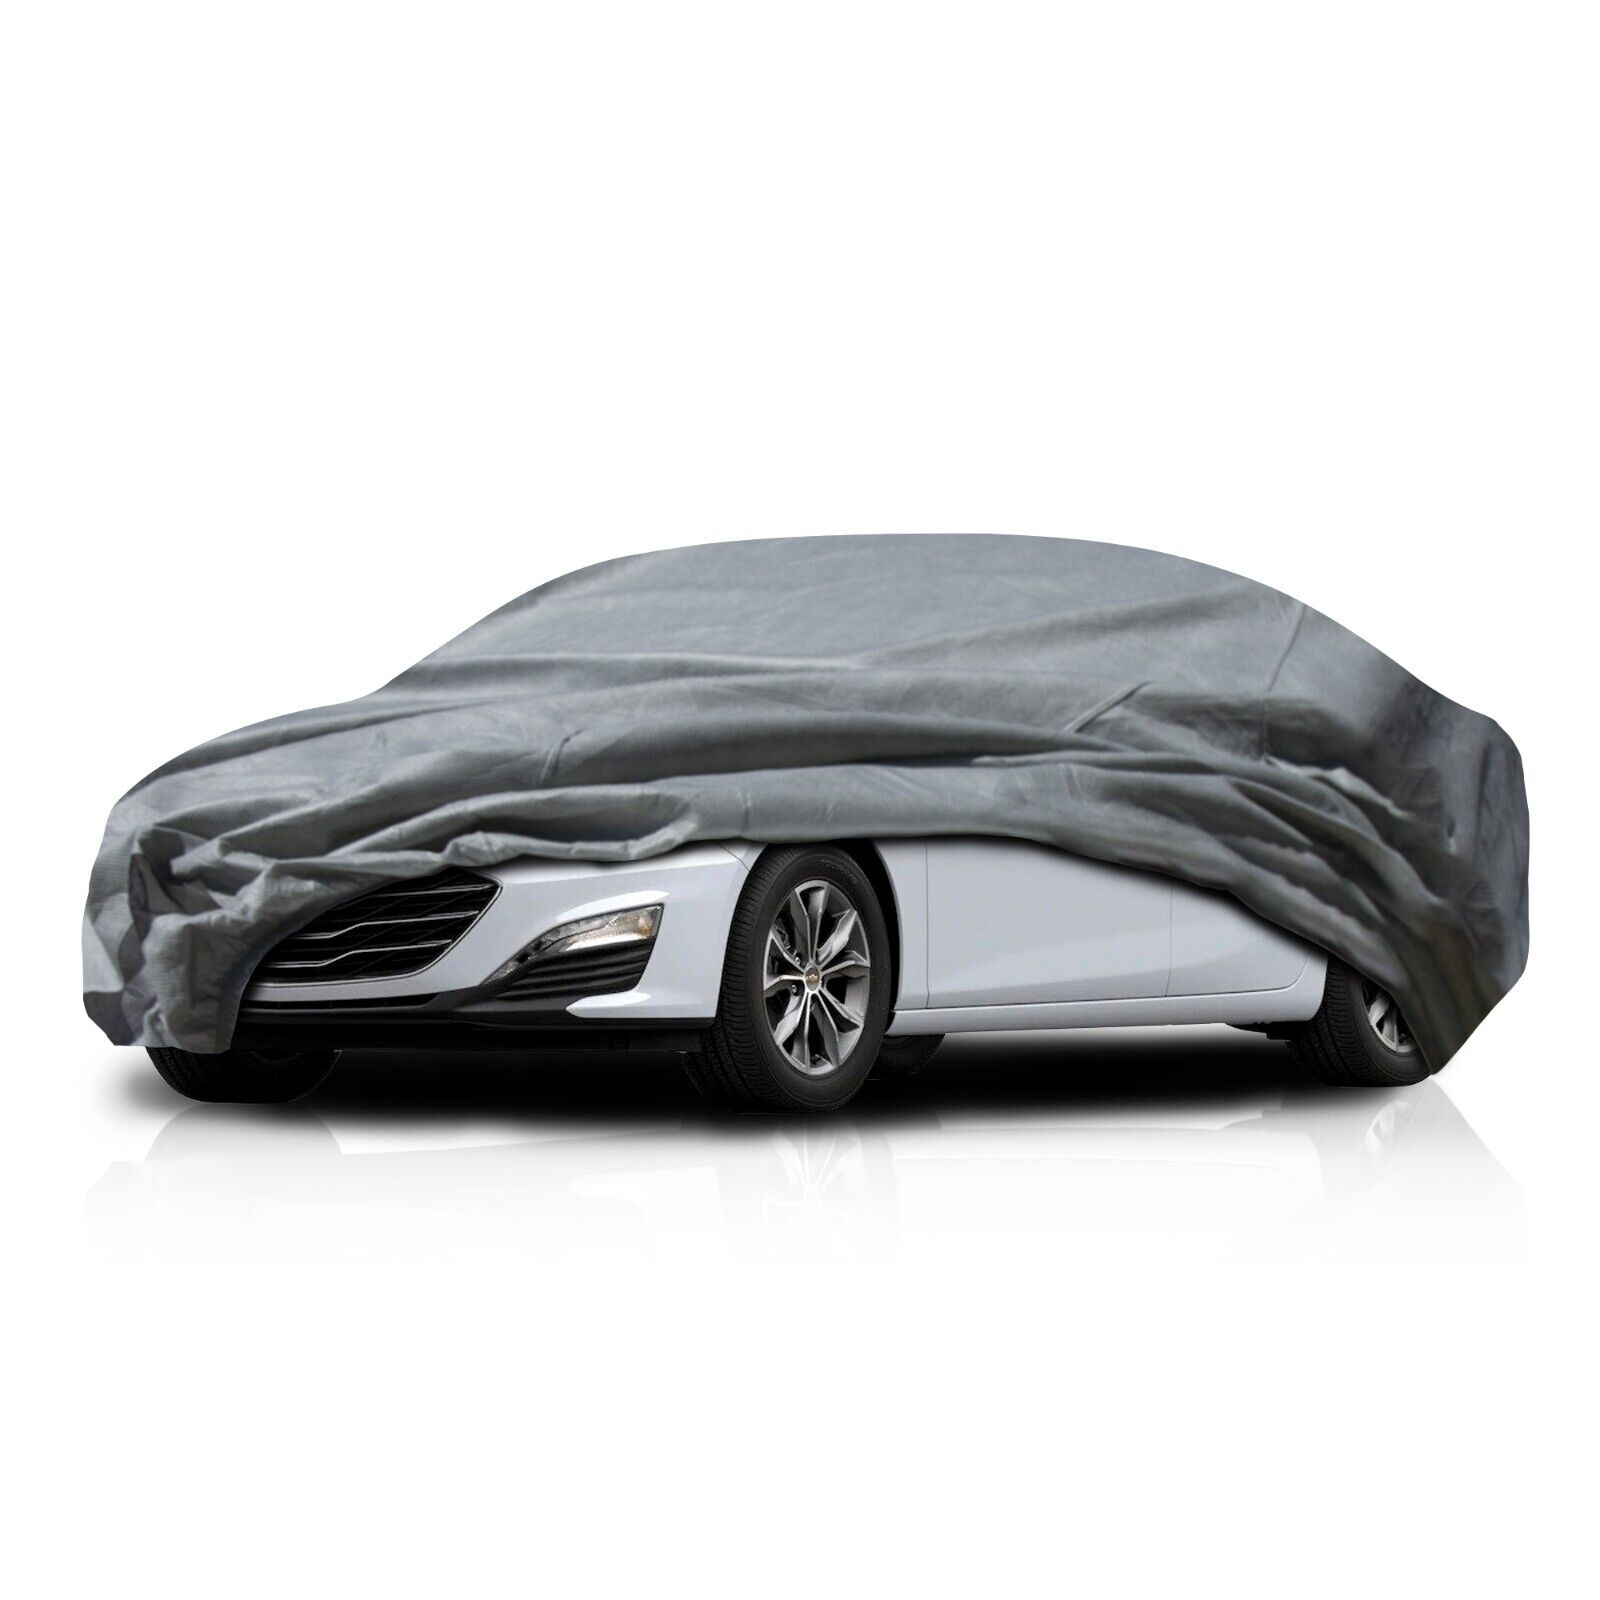 WeatherTec UHD 5 Layer Water Resistant Car Cover for Ford Cortina 1963-1982